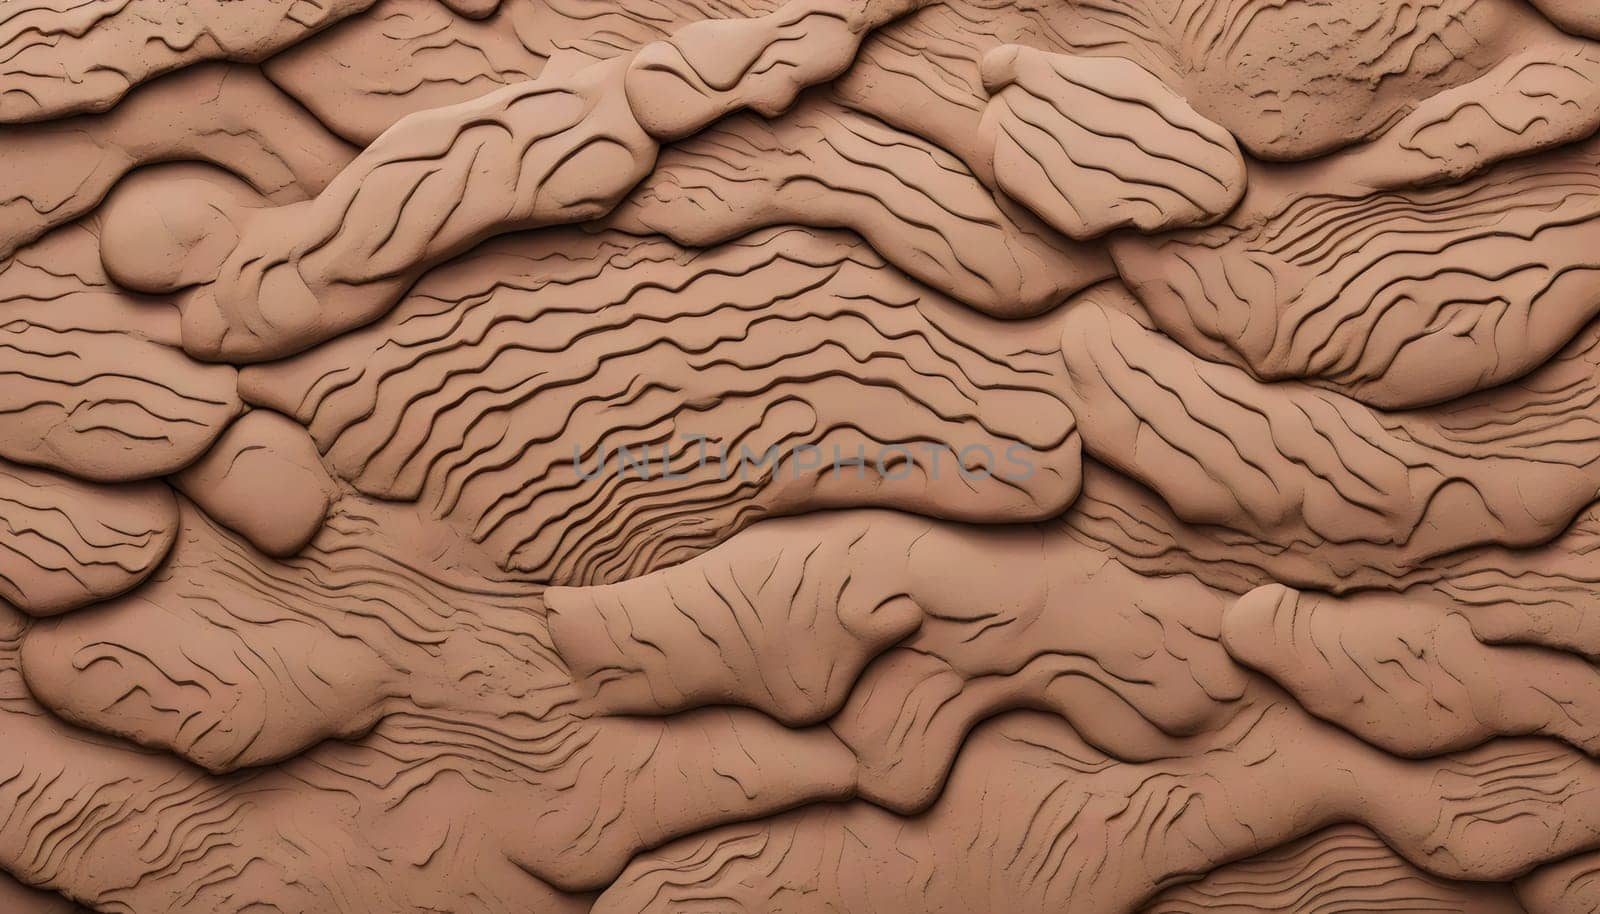 Abstract Clay Texture with Wavy Patterns by rostik924